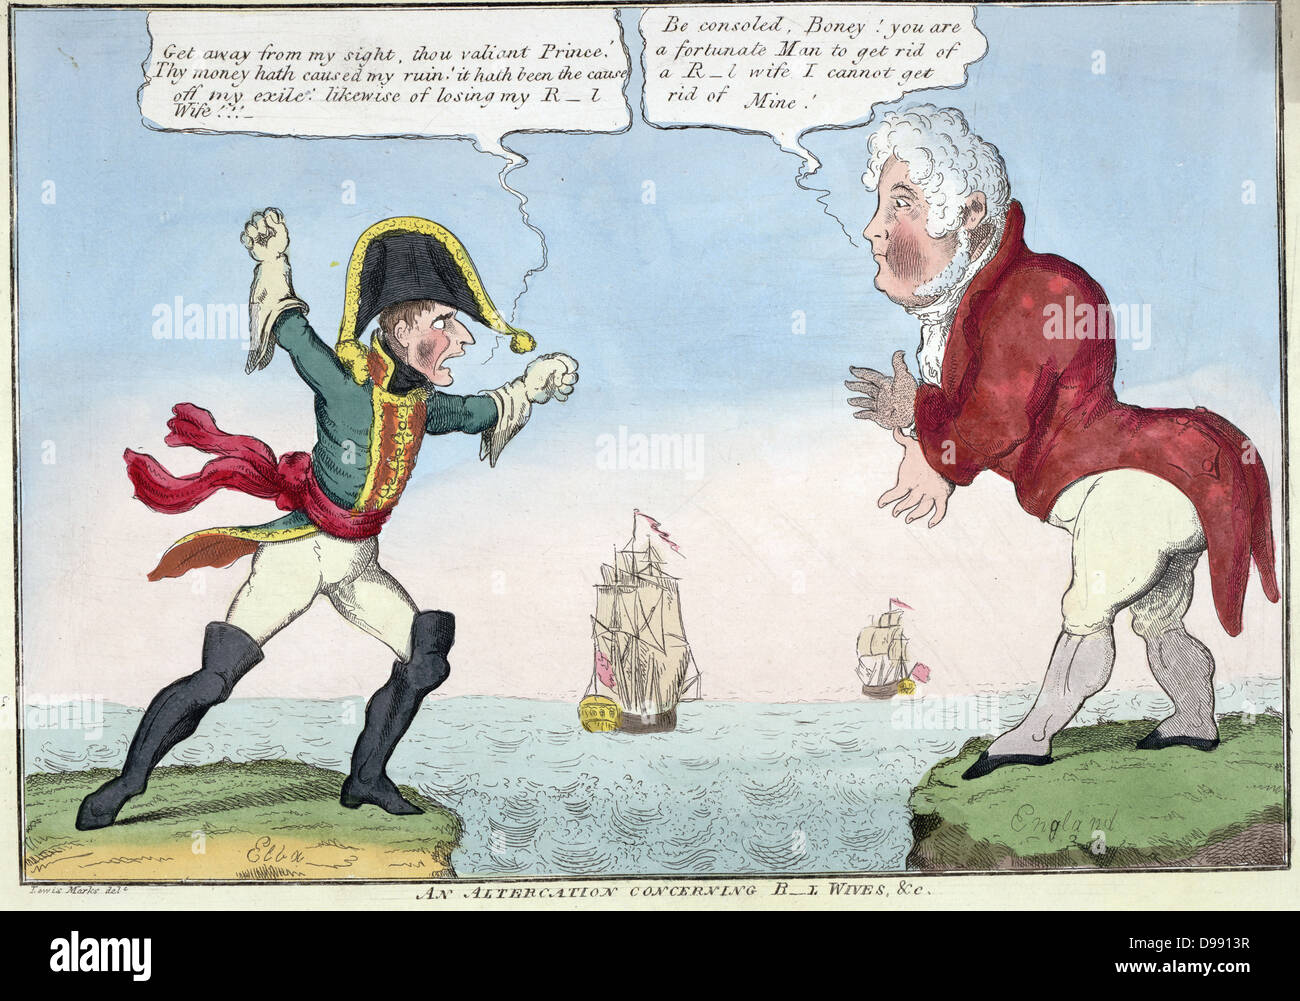 An altercation concerning r-l wives, etc.', Lewis Marks, 1814. Napoleon I on Elba shouting at George Prince of Wales in England that he has been deprived of his r-l wife. George says Napoleon is fortunate. He cannot get rid of his wife. Stock Photo